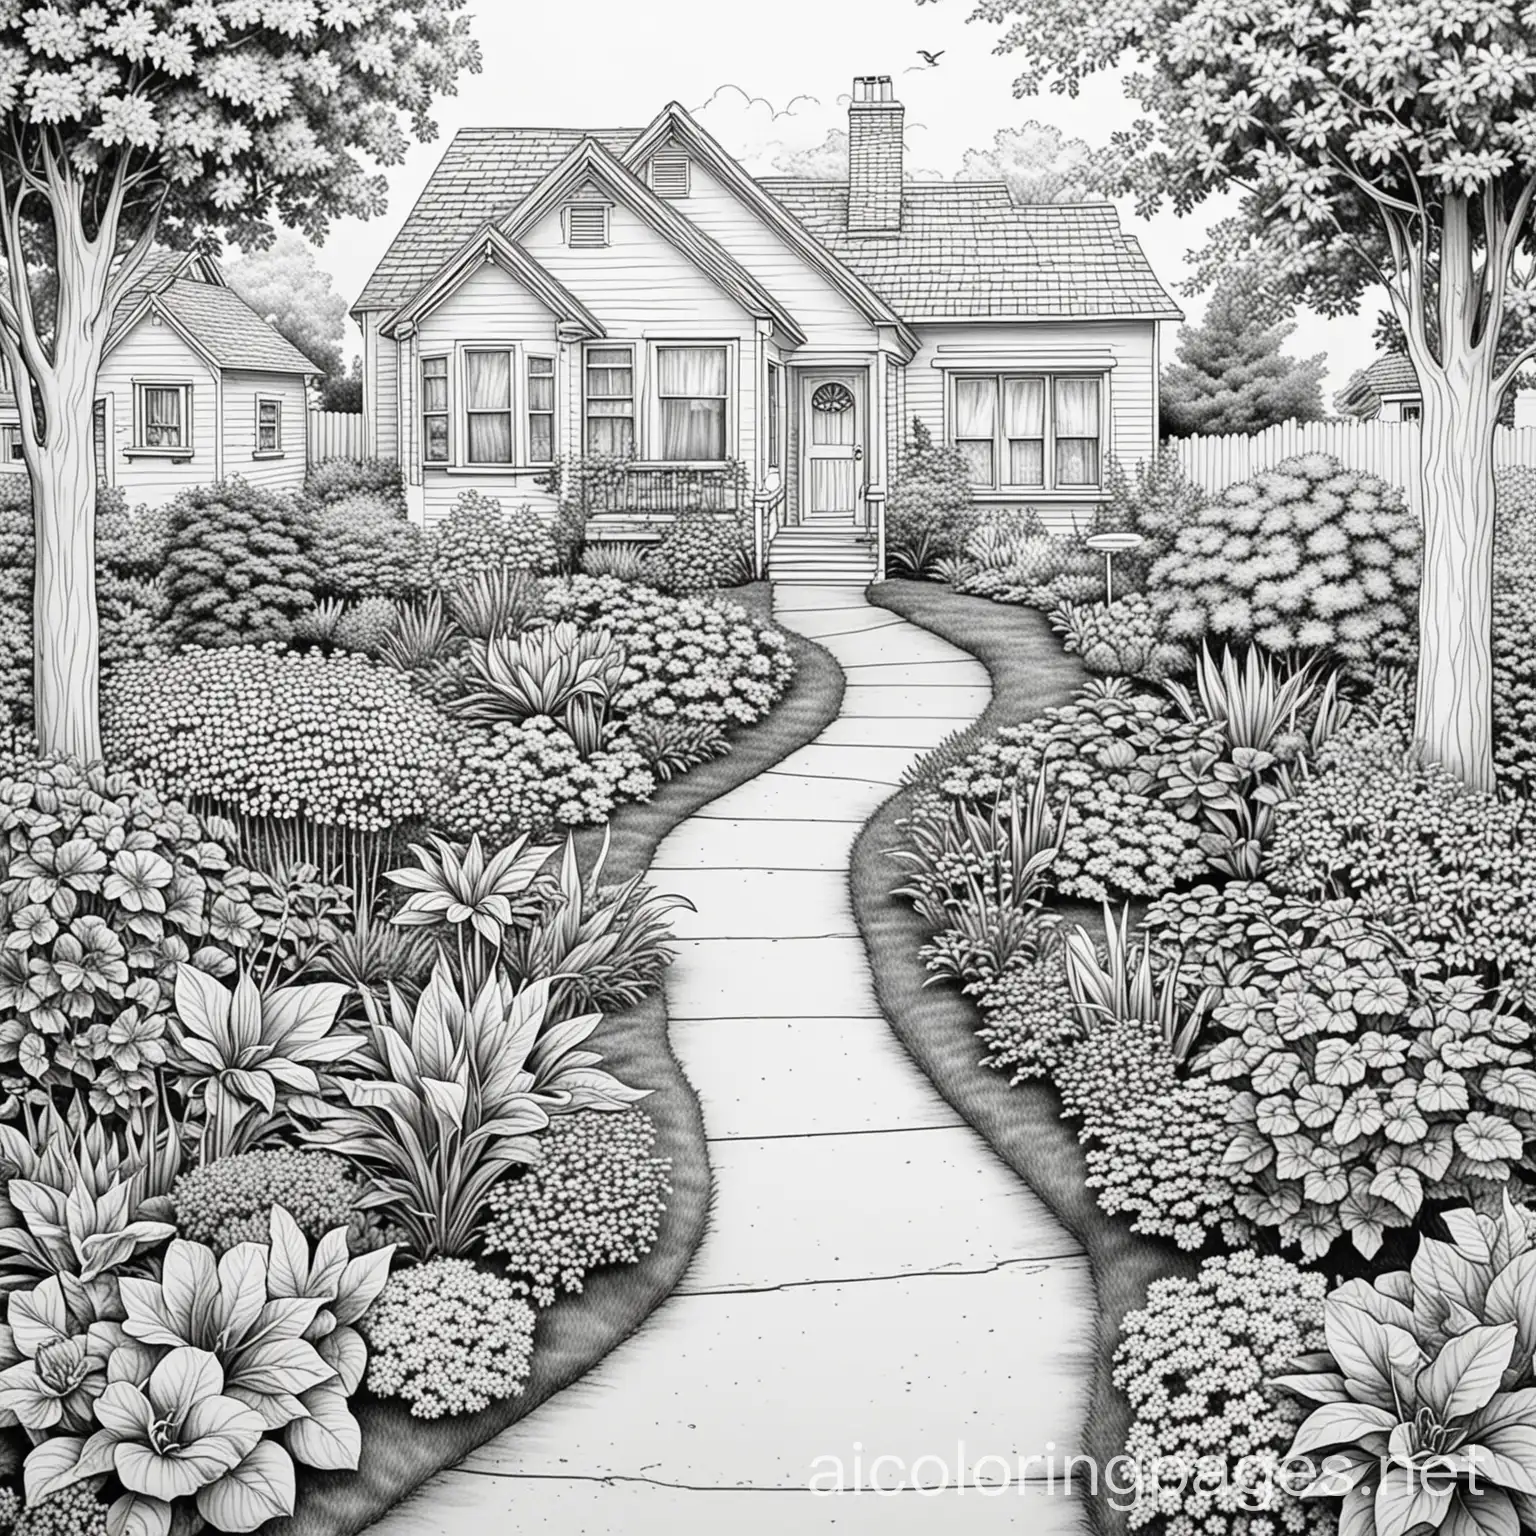 front yard gardens, Coloring Page, black and white, line art, white background, Simplicity, Ample White Space. The background of the coloring page is plain white to make it easy for young children to color within the lines. The outlines of all the subjects are easy to distinguish, making it simple for kids to color without too much difficulty